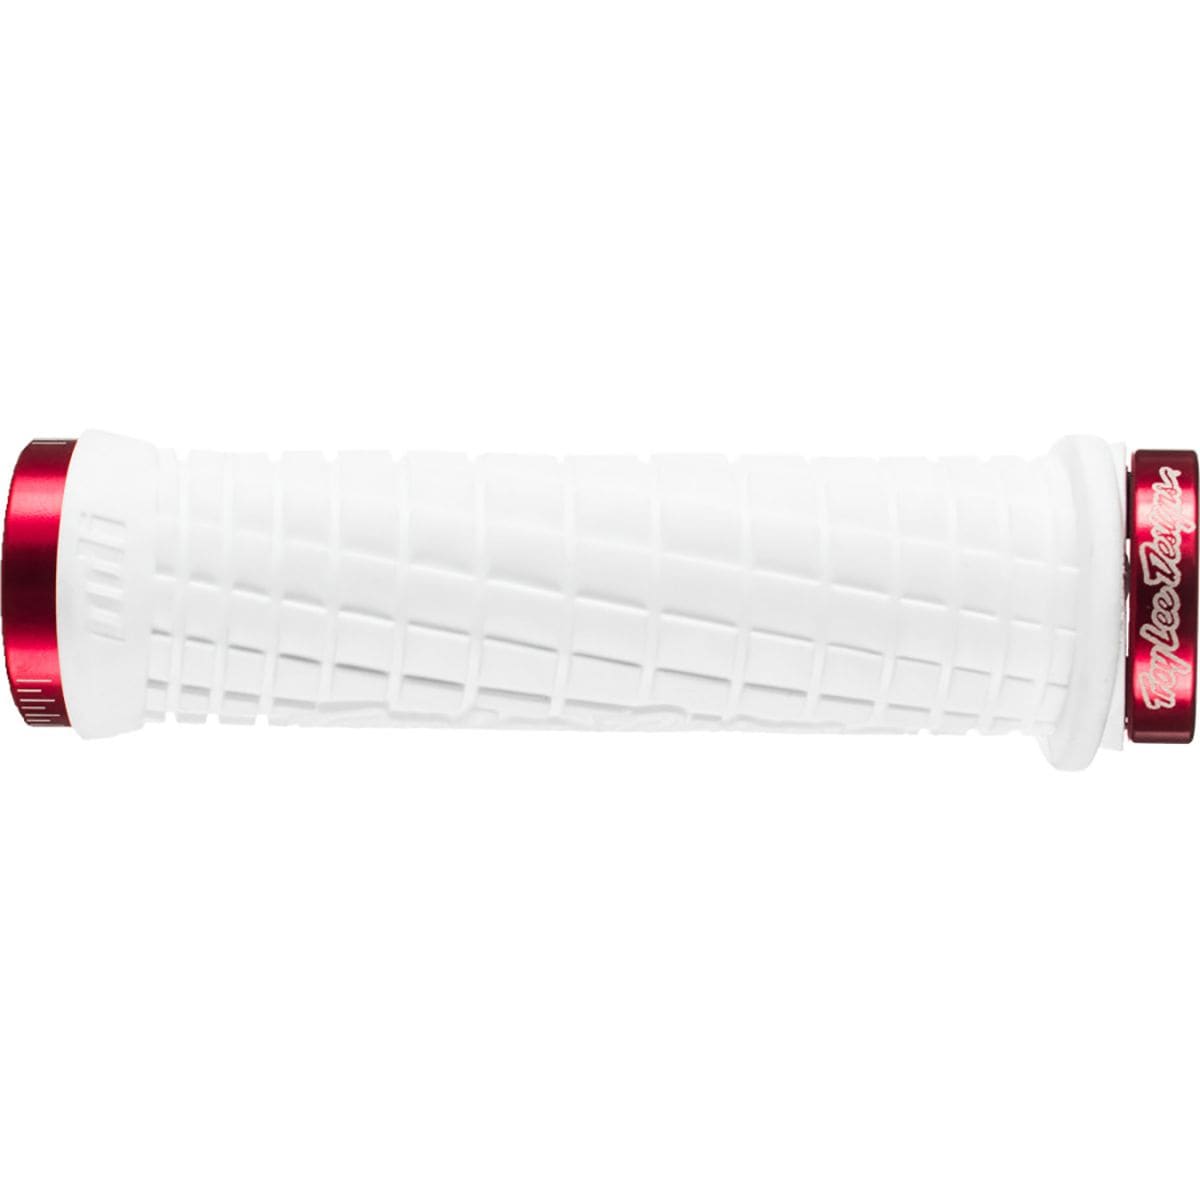 Troy Lee Designs ODI Grips White/Red, One Size